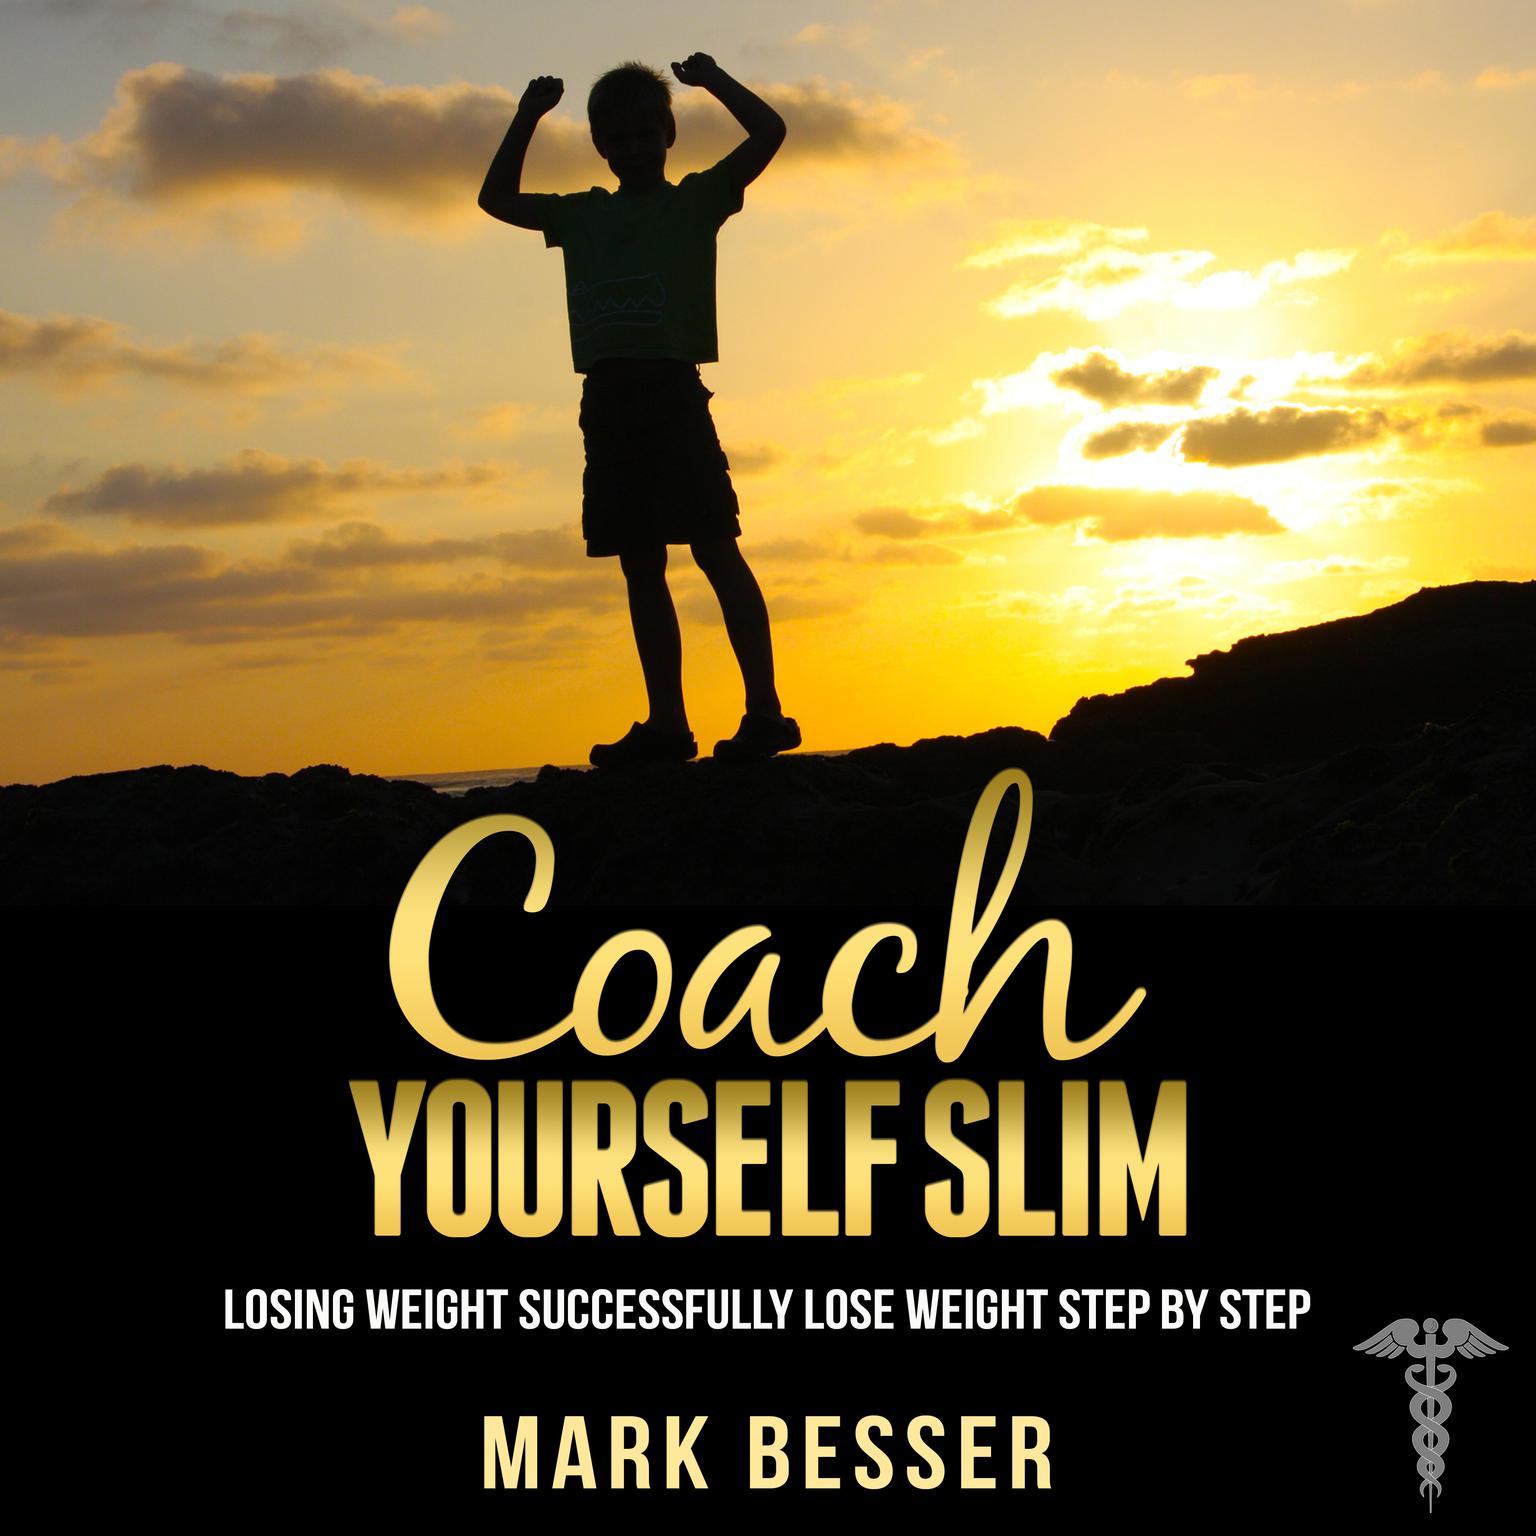 Coach Yourself Slim: Losing Weight Successfully—Lose Weight Step by Step. Audiobook, by Mark Besser